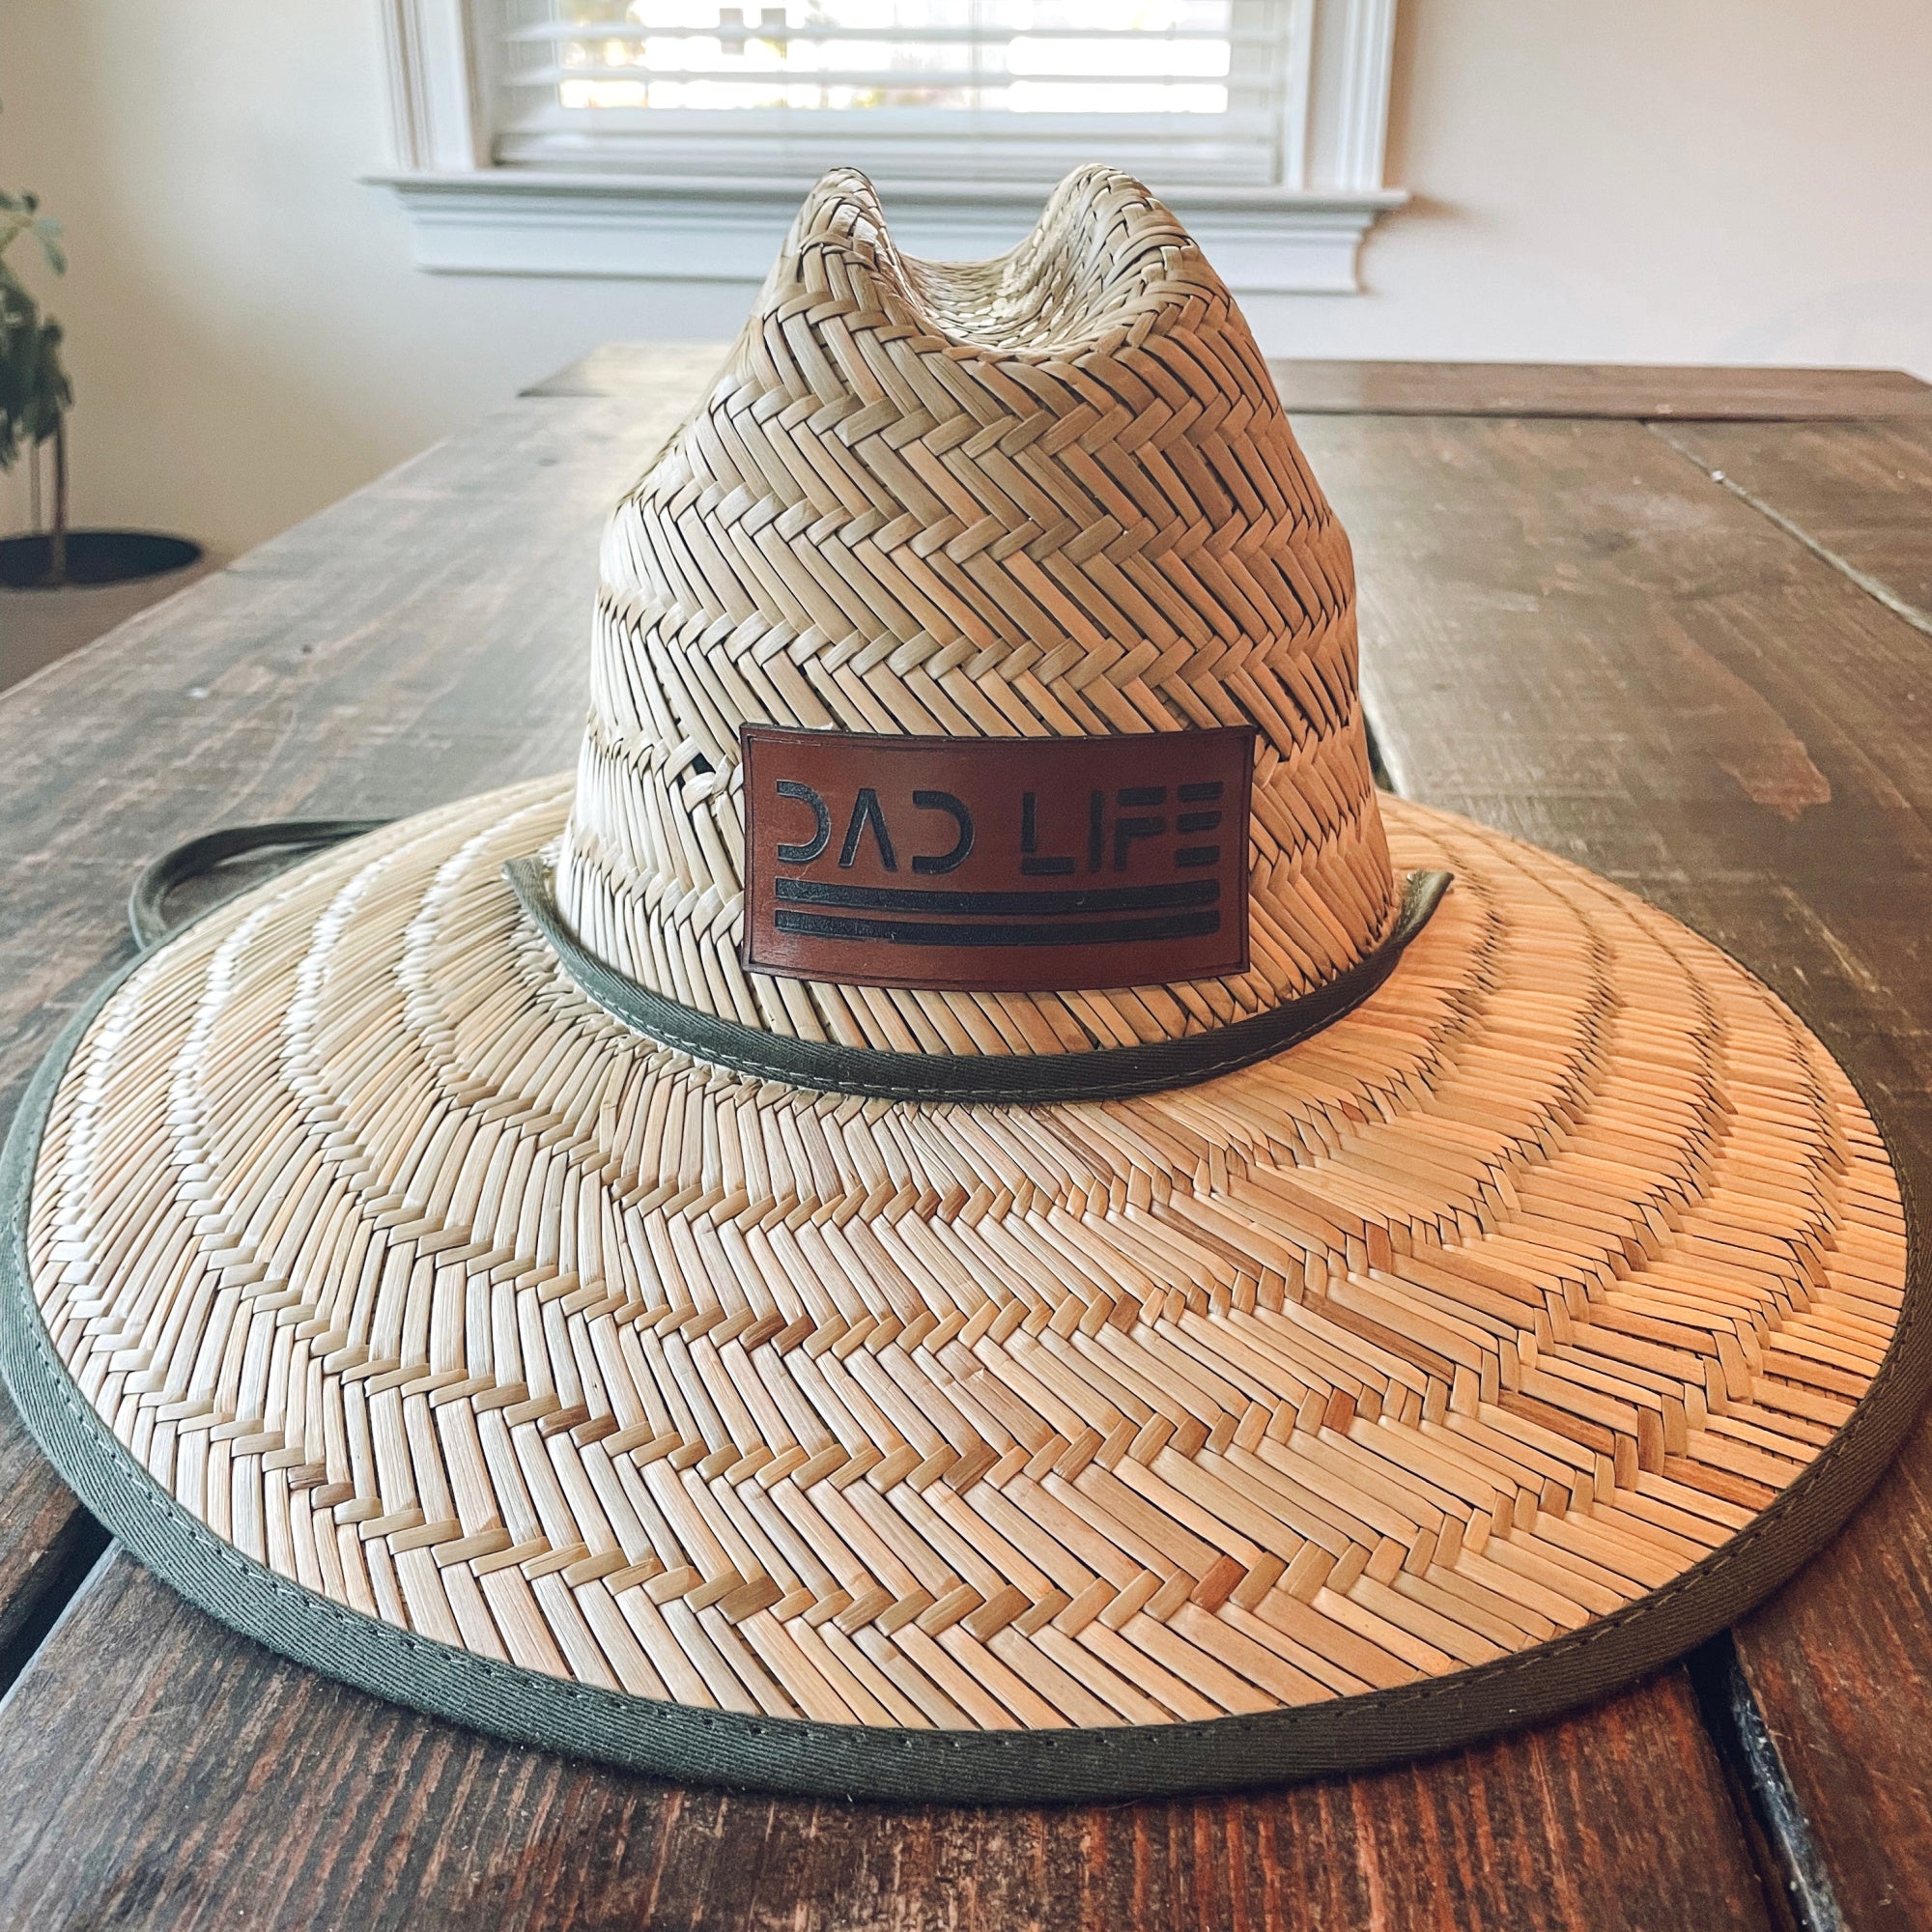 Dad Life Straw Beach Hat – Dads Are Awesome